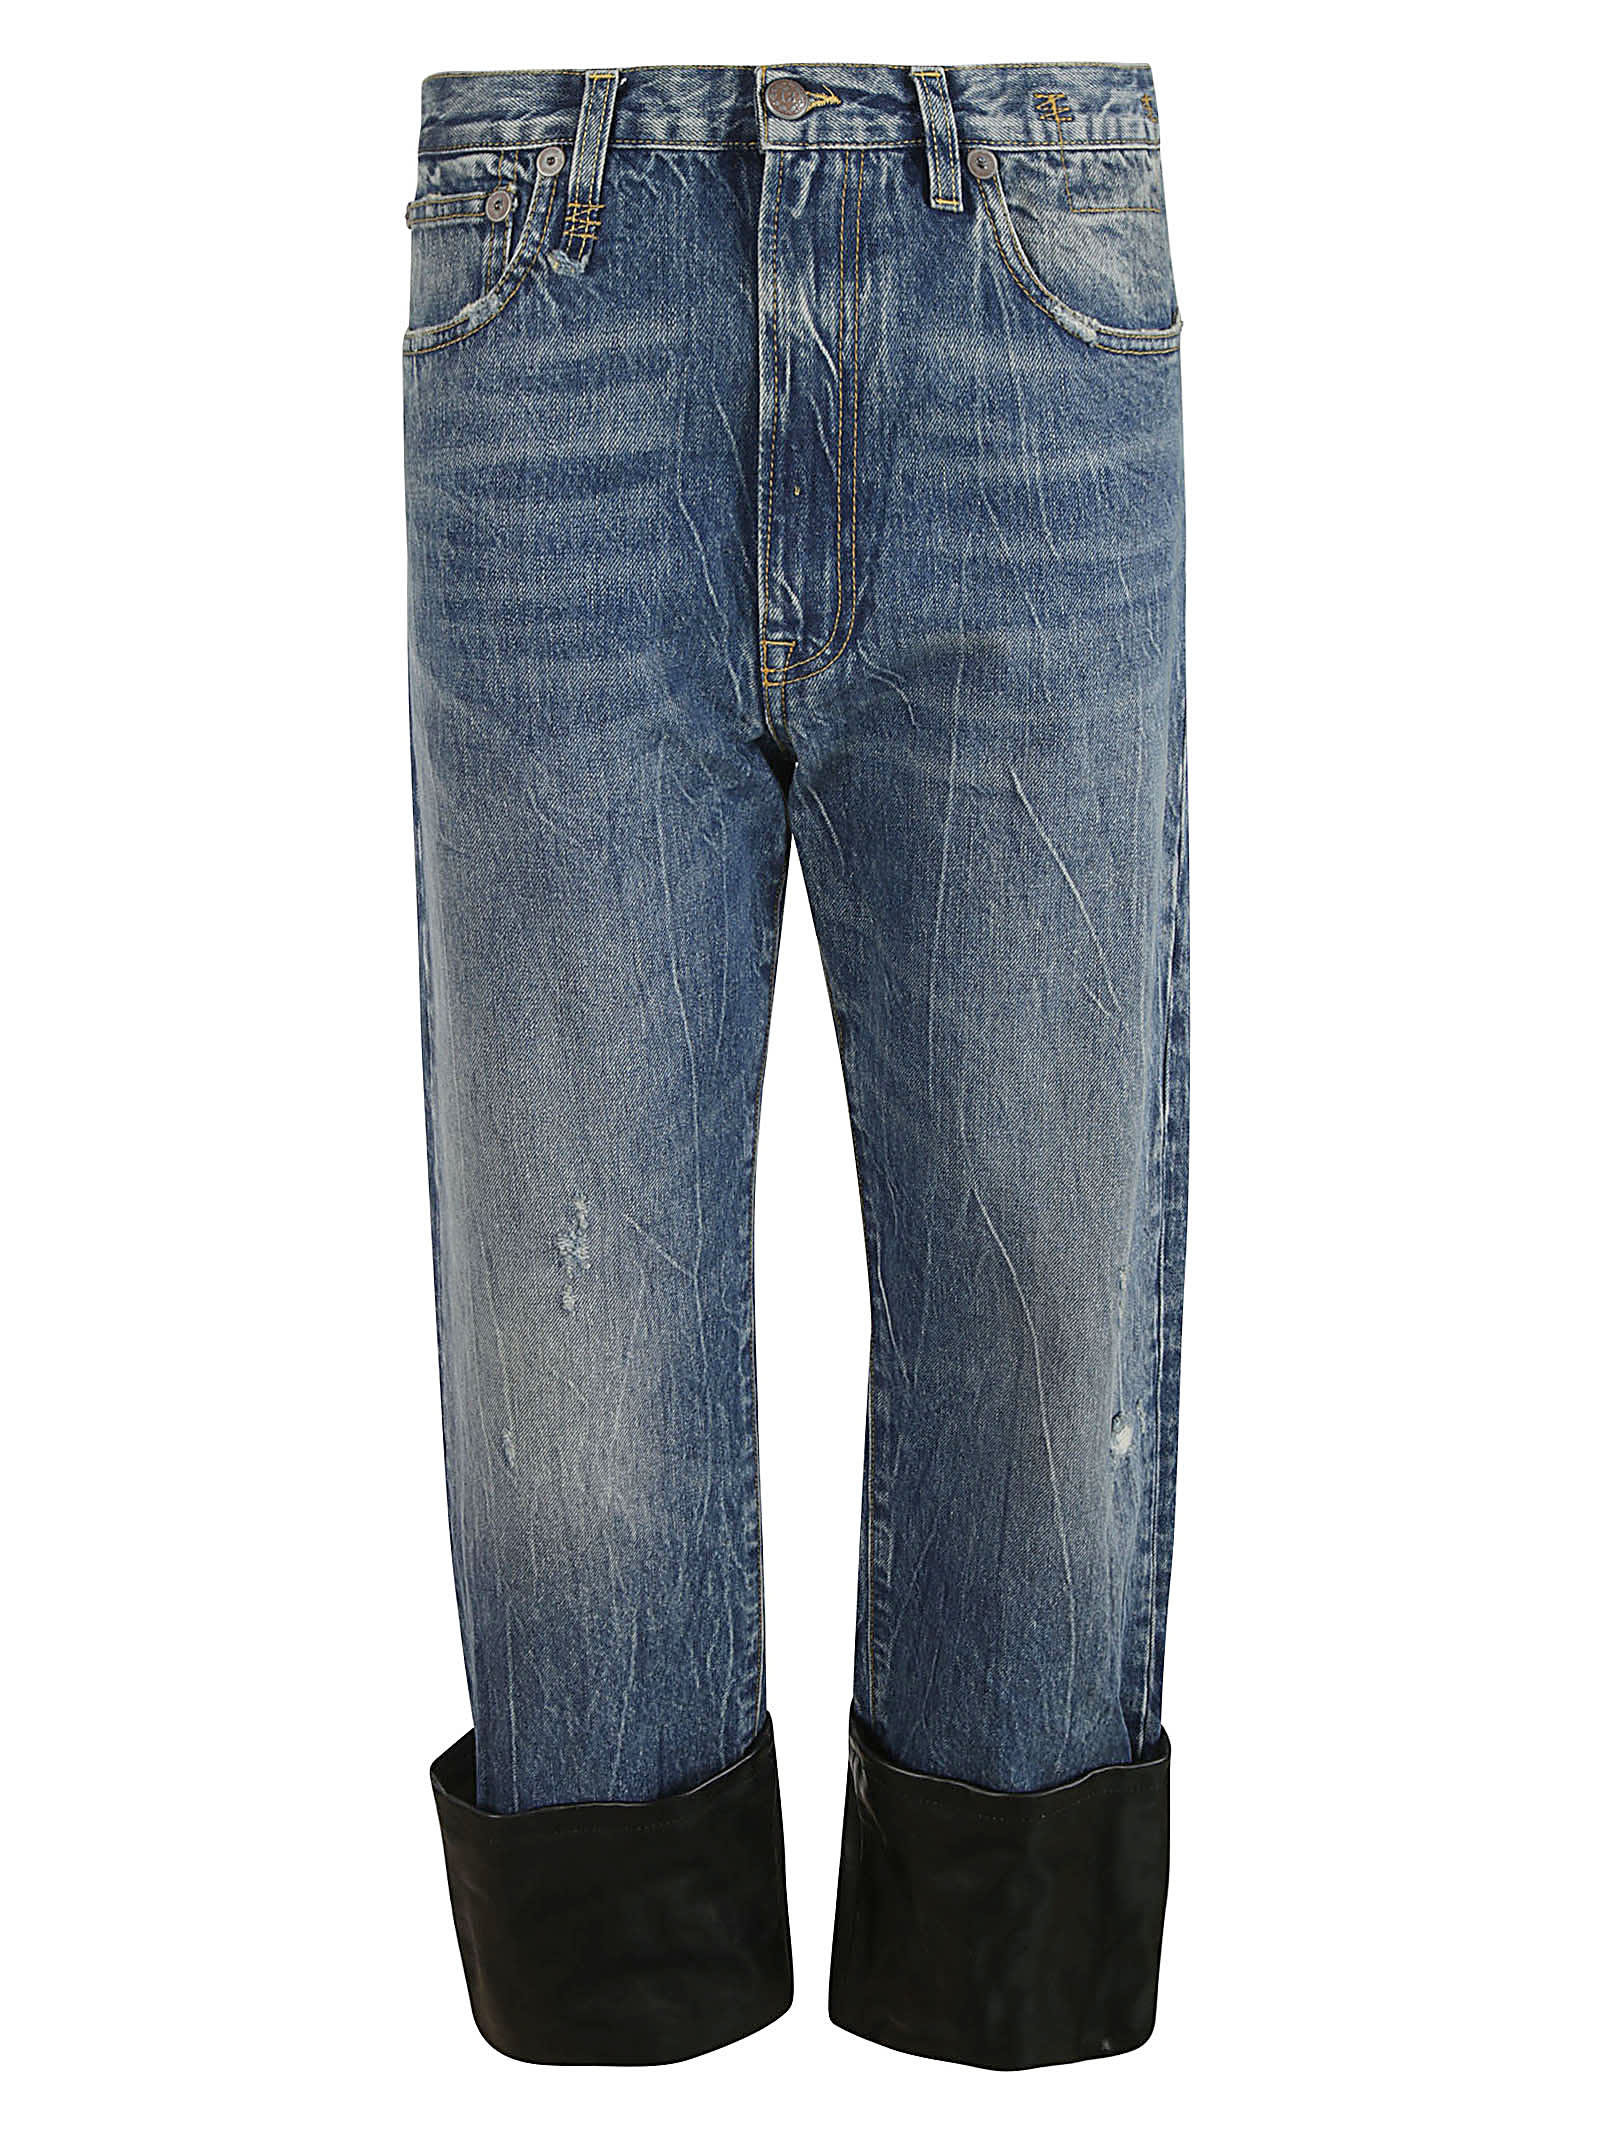 R13 Slim Cuff Jeans In Kelly/leather